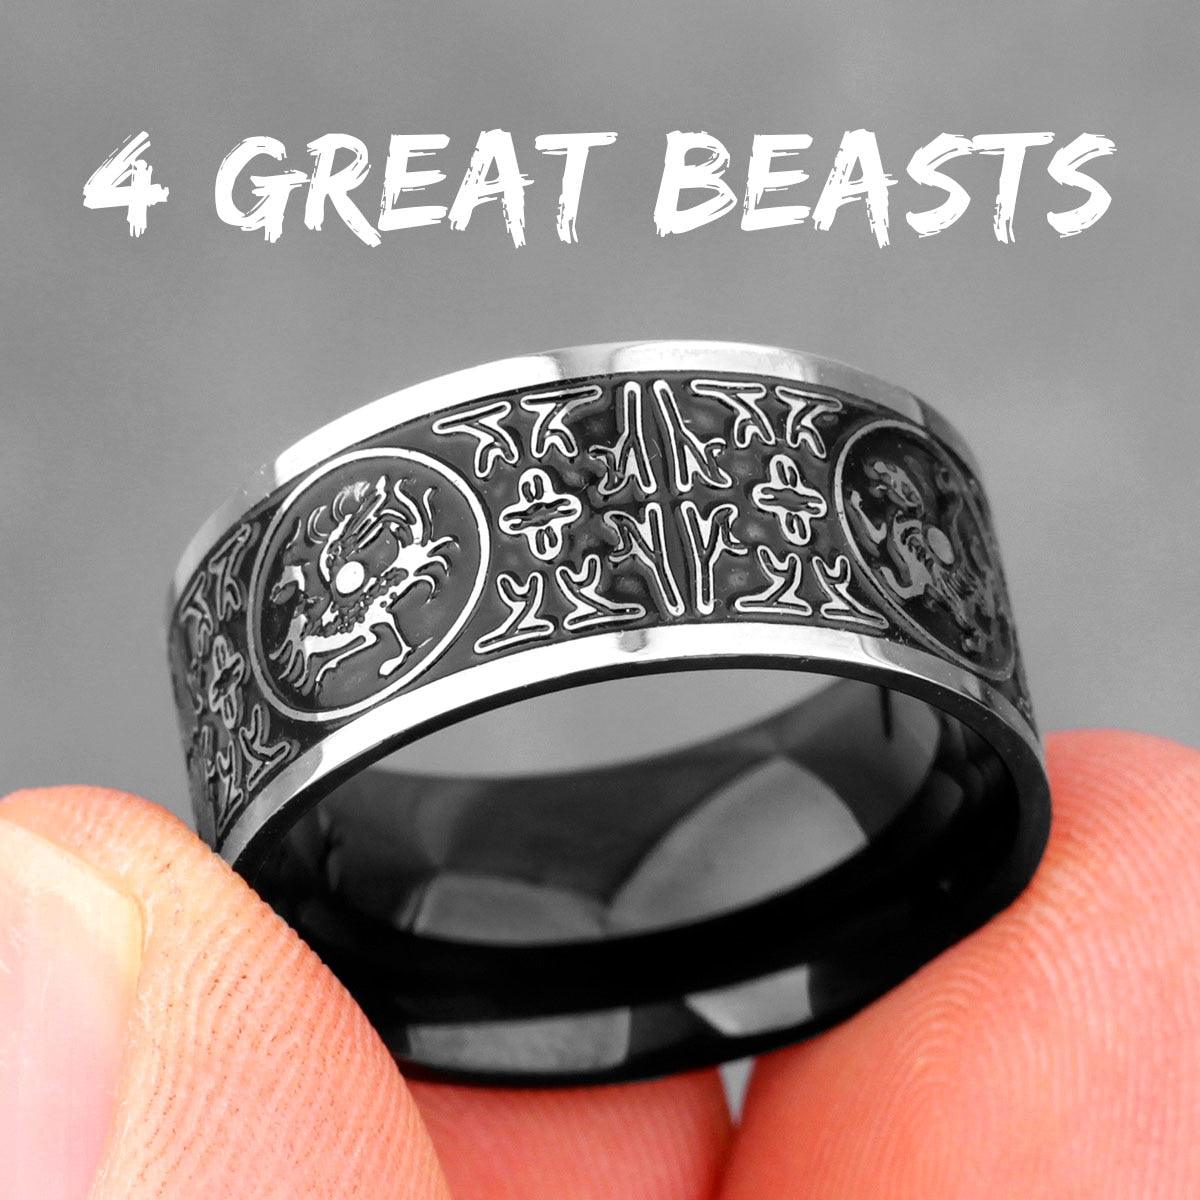 Amulet Chinese Beasts Good Luck Stainless Steel Mens Rings Punk Cool for Male Boyfriend Biker Jewelry Creativity Gift Wholesale